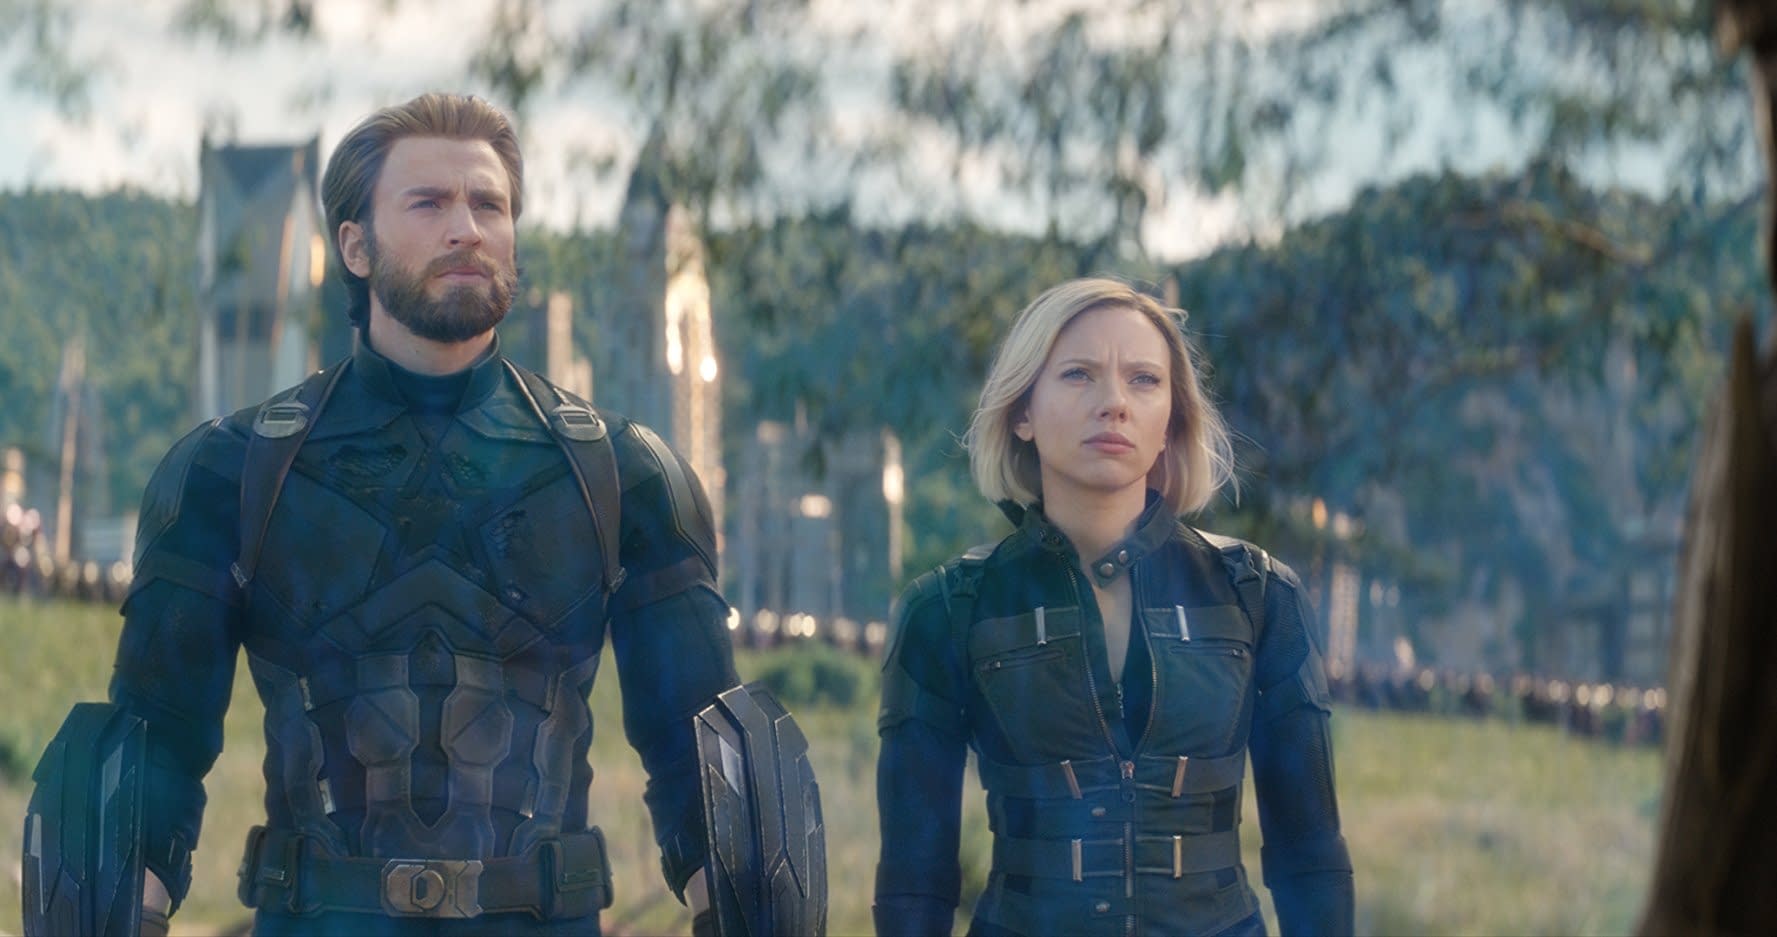 Avengers 4 Will Feature a Captain America and Black Widow with a "Harder Edge"